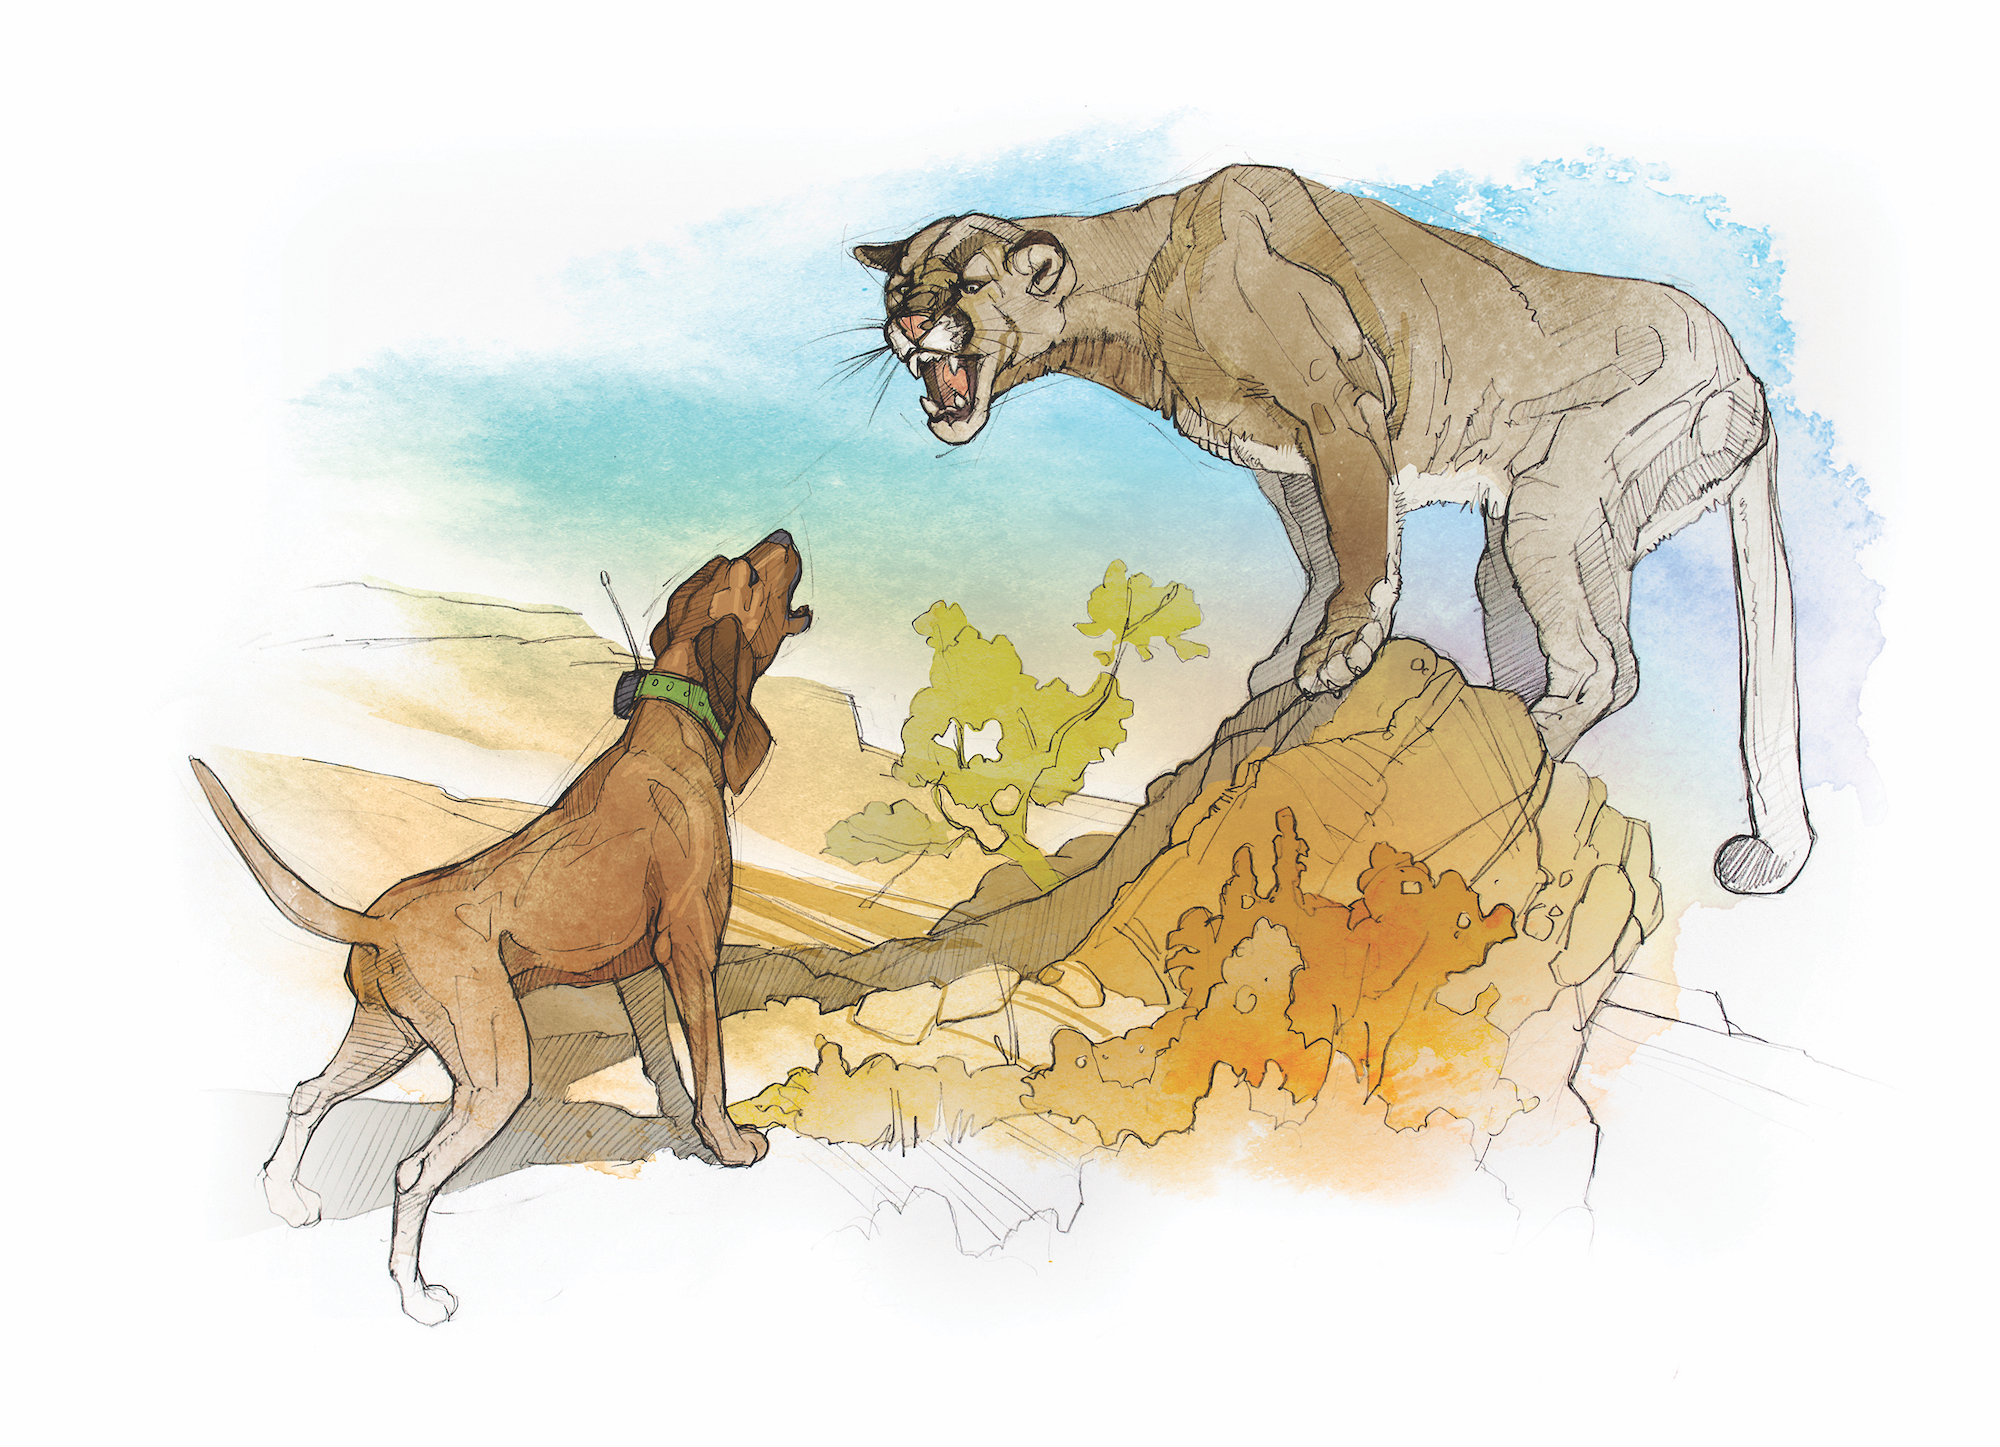 An illustration of a coonhound baying a mountainlion.